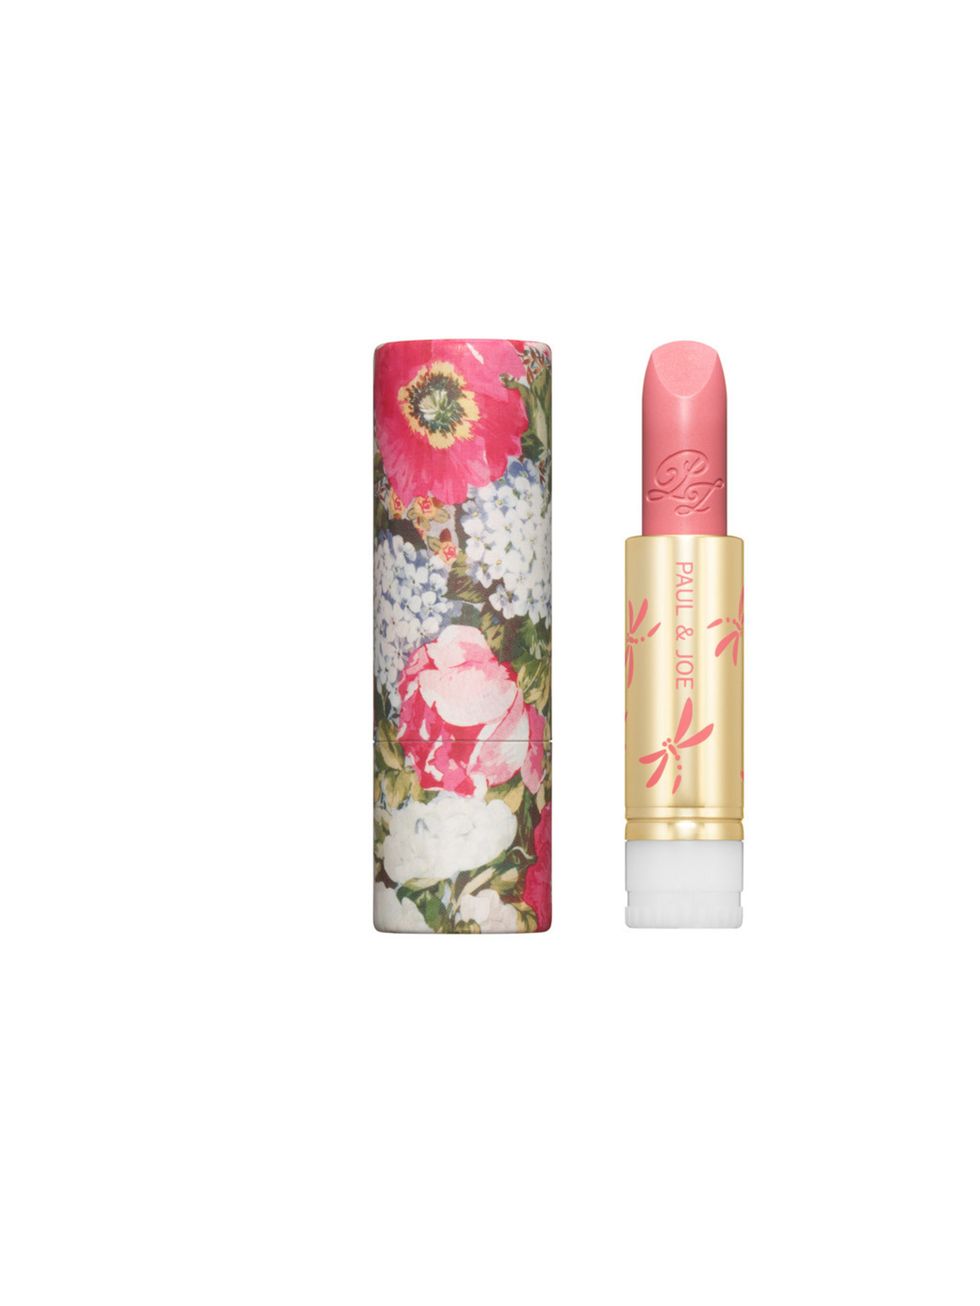 <p>Paul &amp; Joe Limited Edition Lipstick in Beloved and Case, £26.50. Available September 1 at Harrods, Fenwick, beautybay.com and asos.com</p>